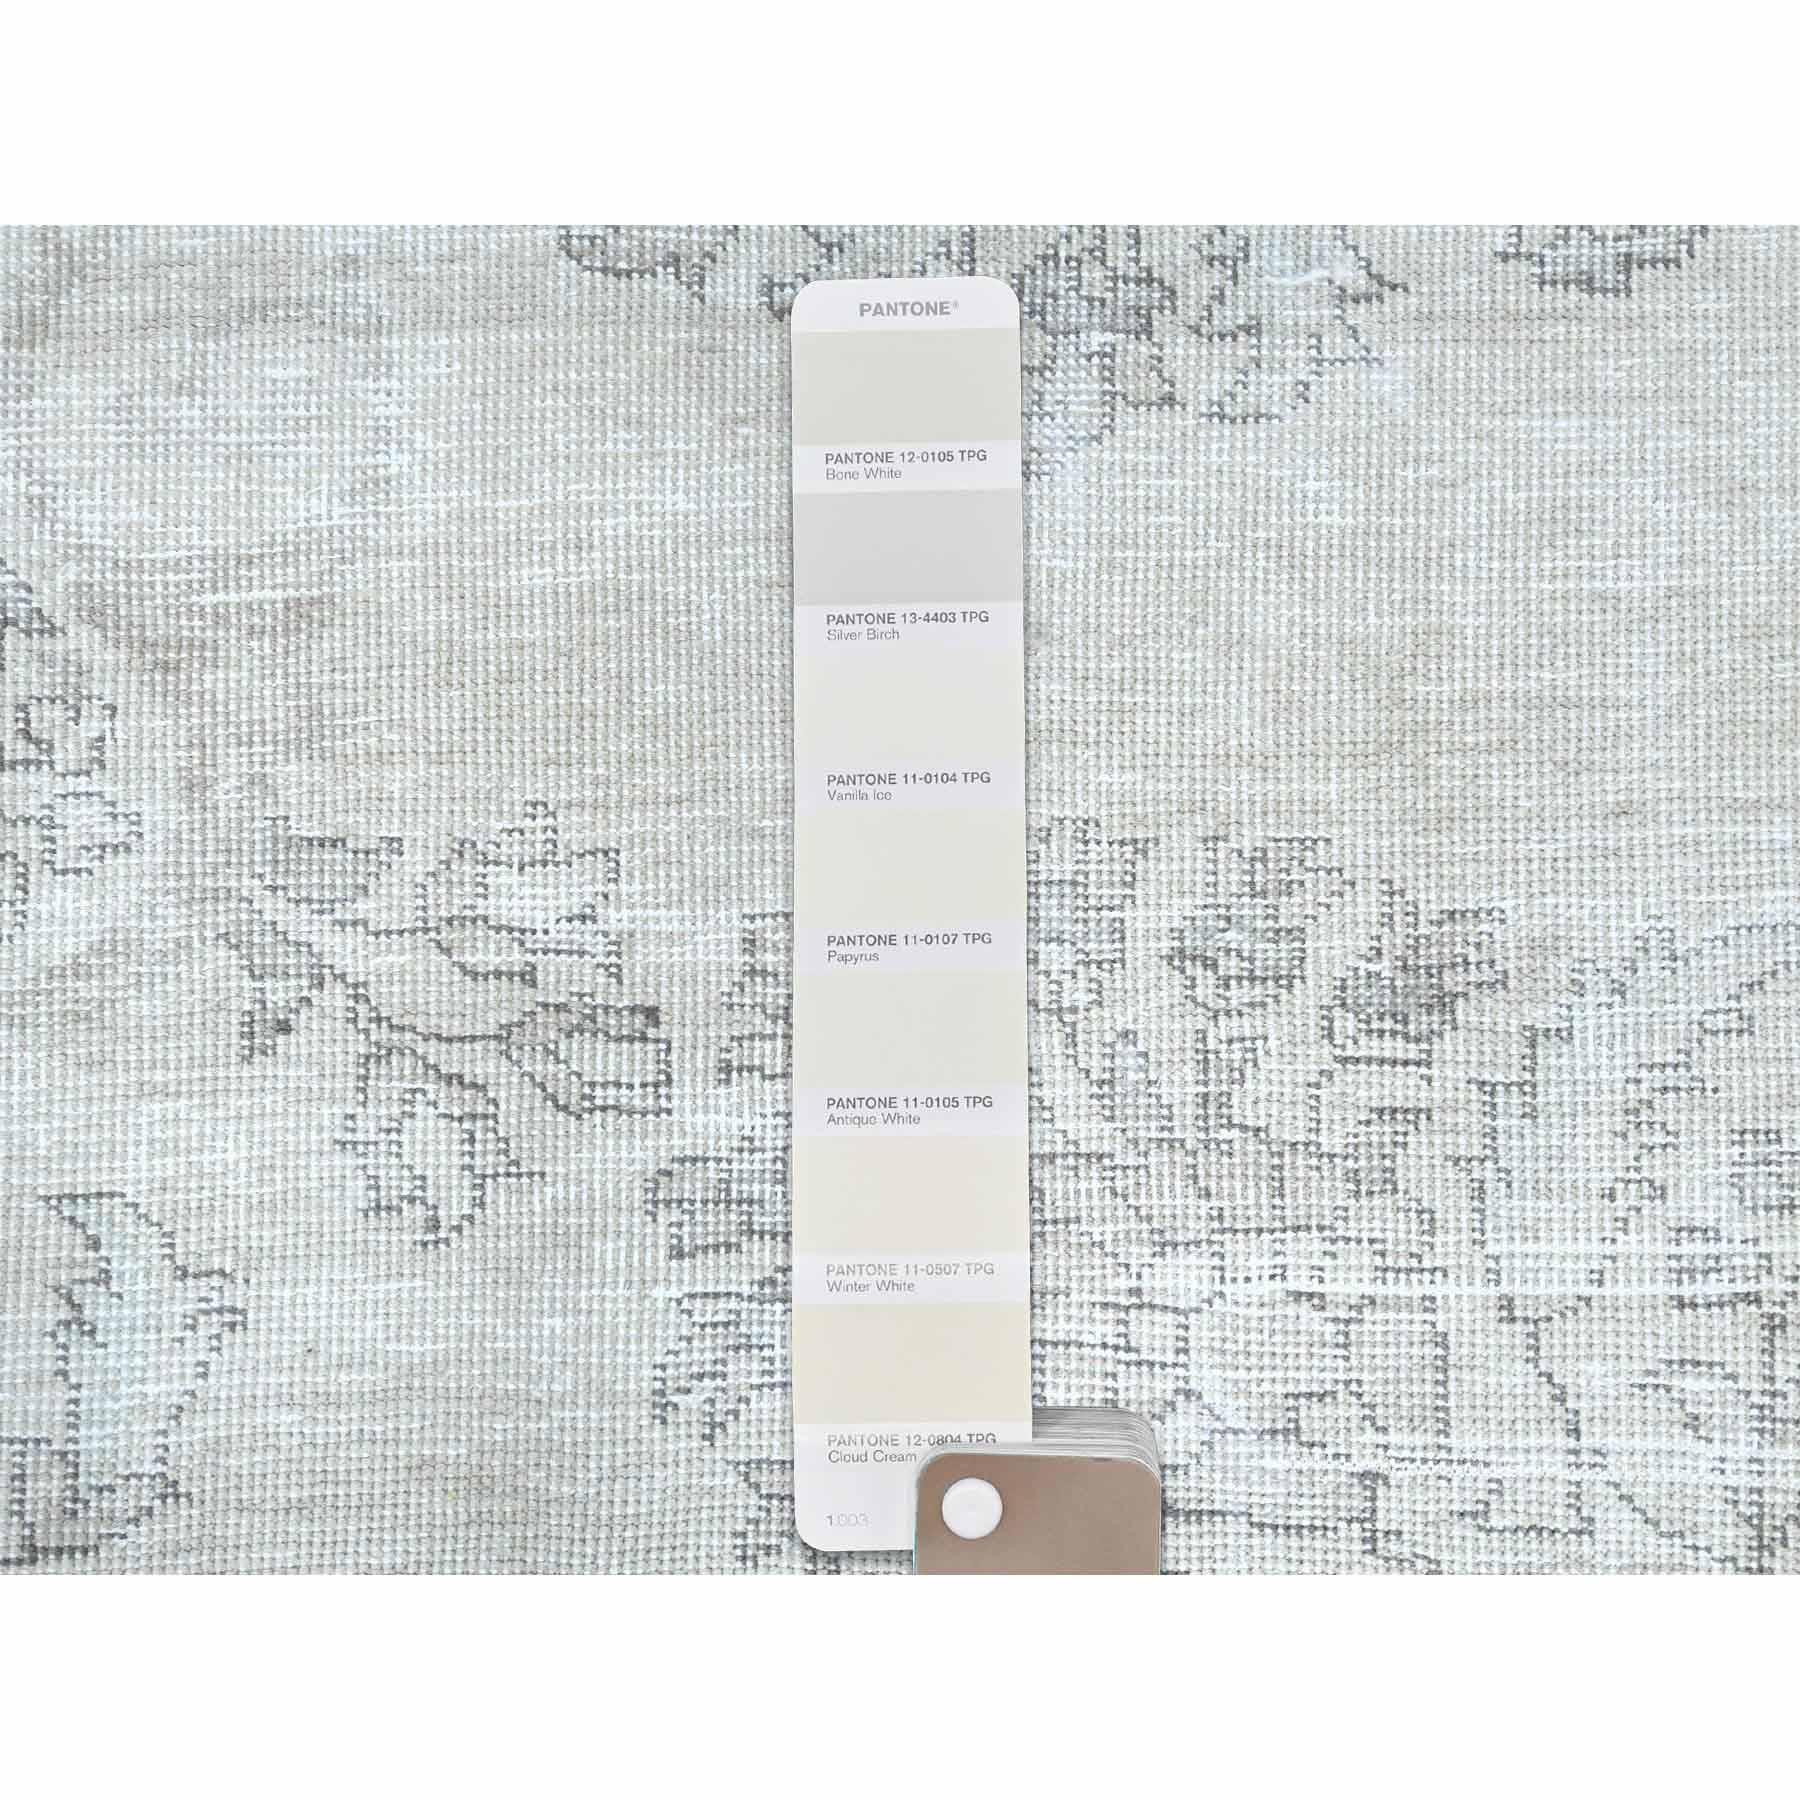 Overdyed-Vintage-Hand-Knotted-Rug-408490